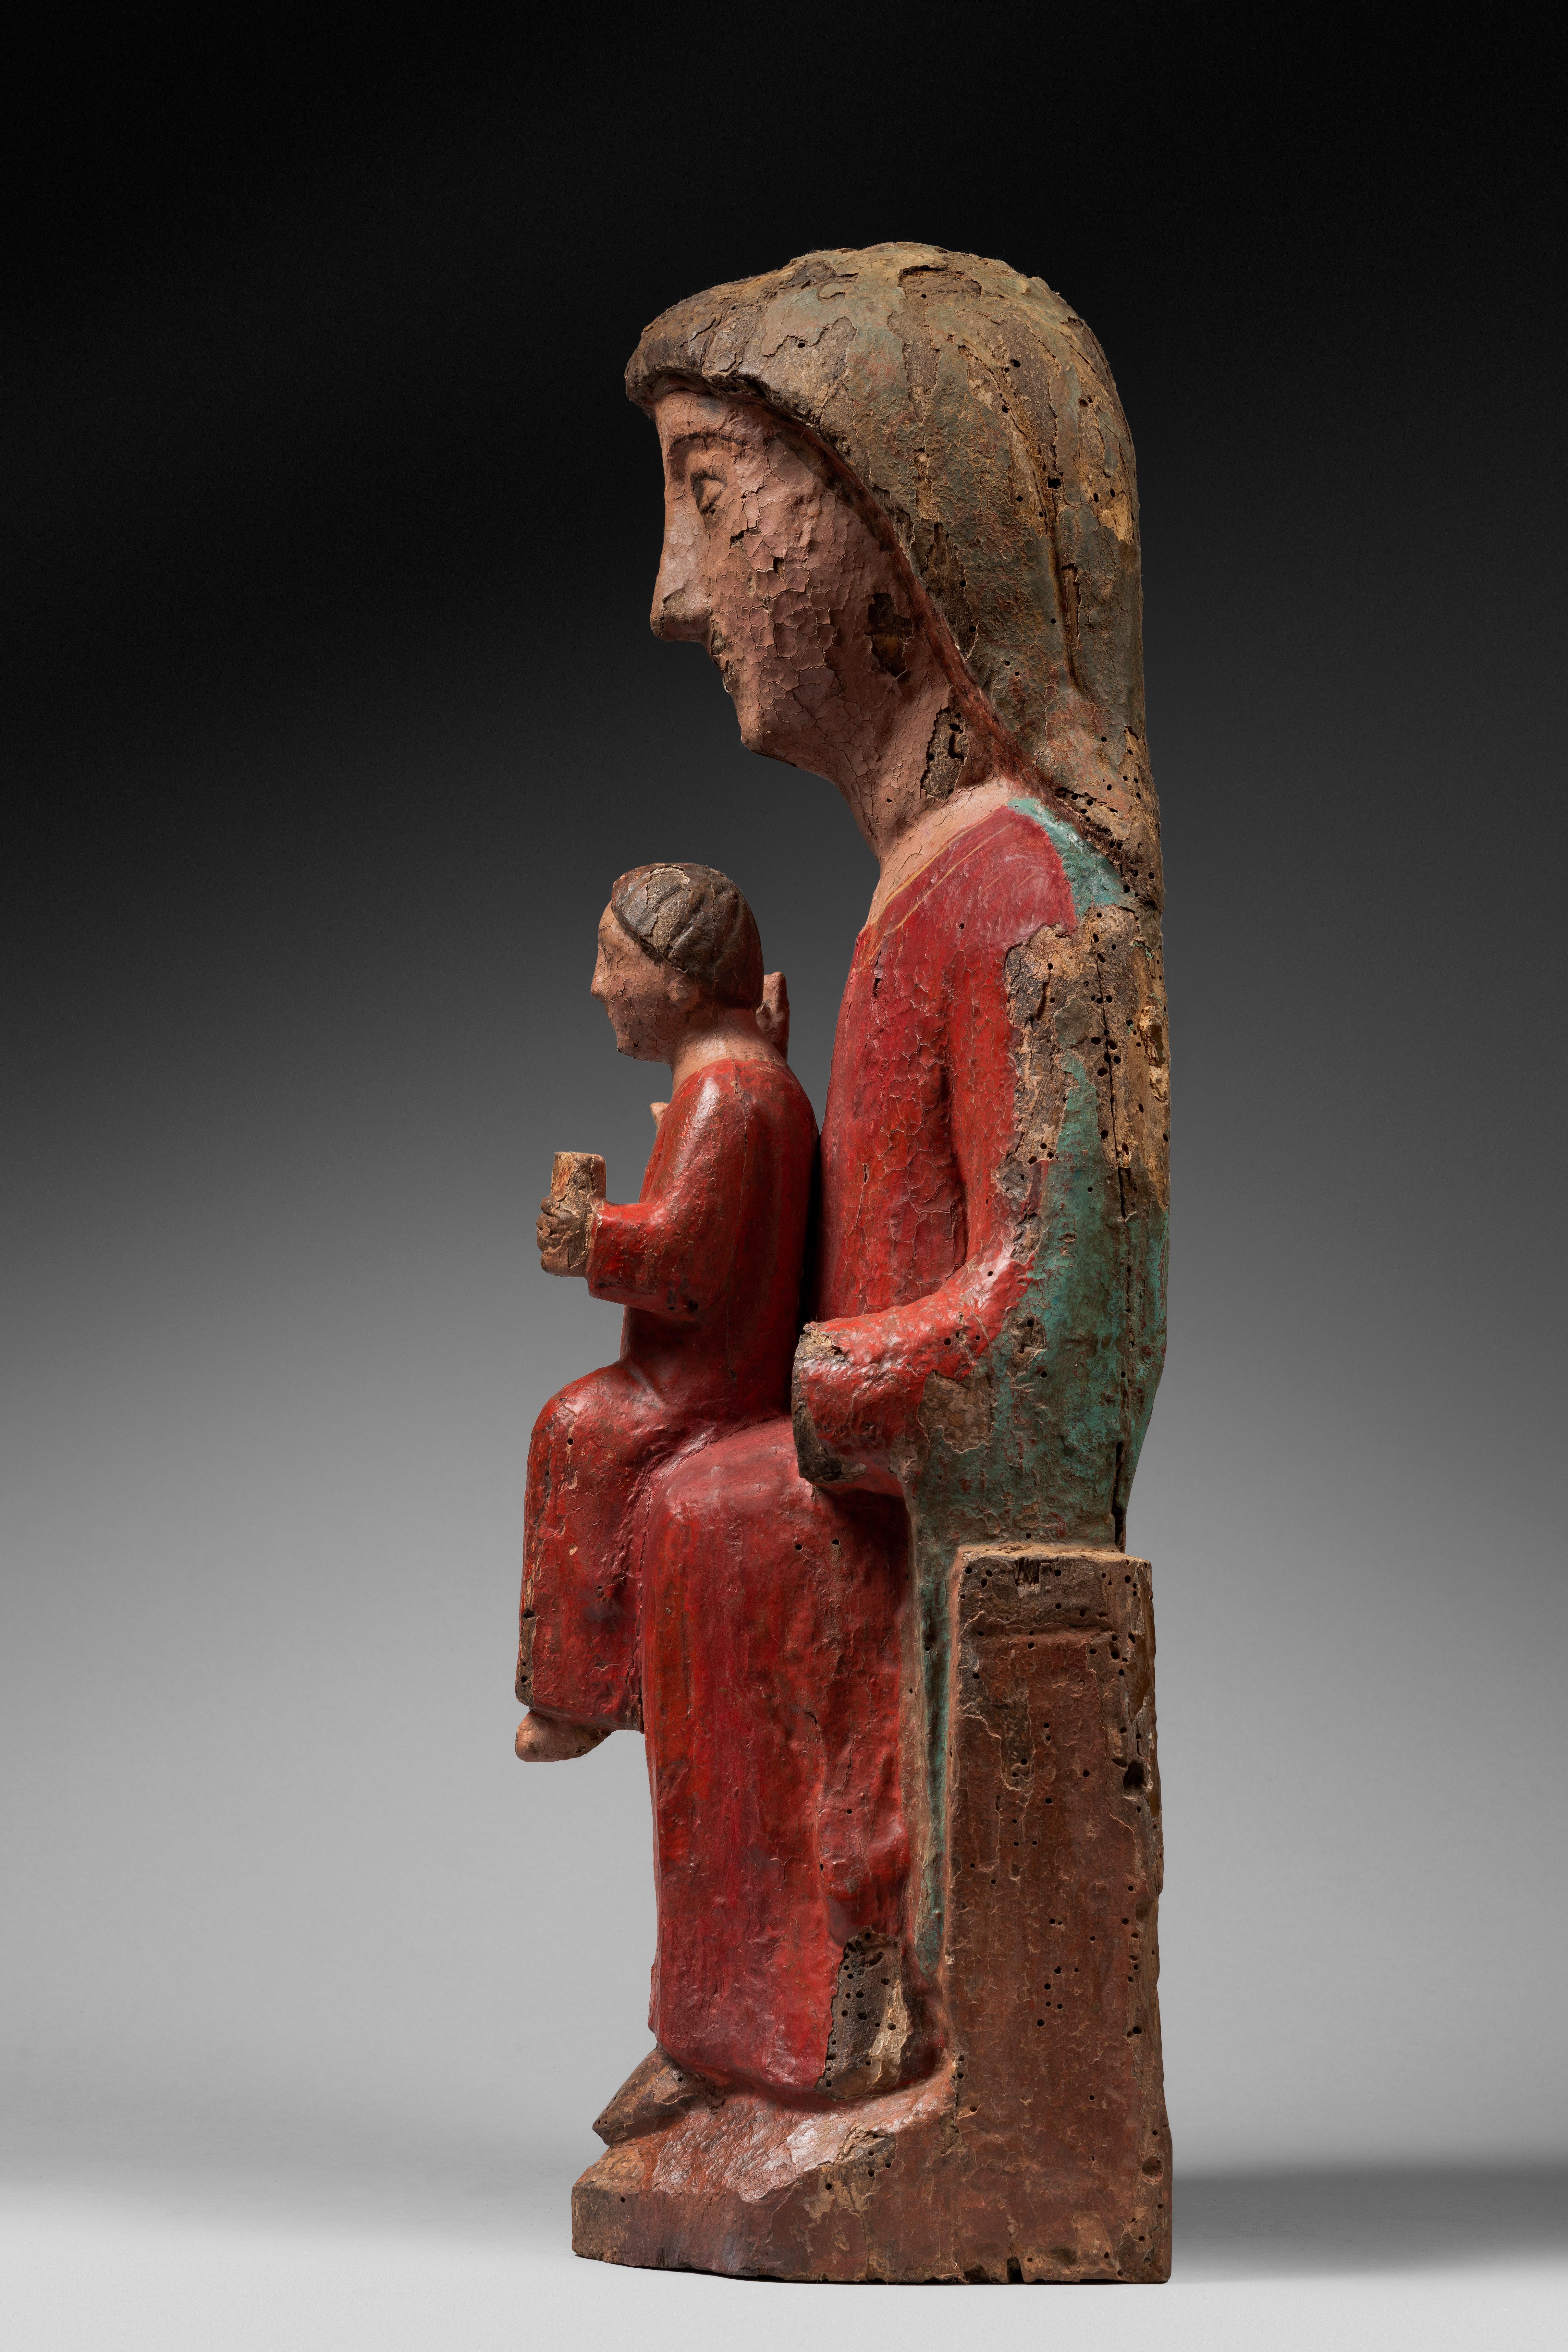 VIRGIN AND CHILD IN MAJESTY

ORIGIN: CASTILLE
PERIOD: 13 CENTURY

Height:  67 cm
Width: 27 cm
Depth: 22  cm

Polychrome wood
Good condition


In the middle of the 12th century, the Virgin Mary took her place in churches, sitting in majesty, serving